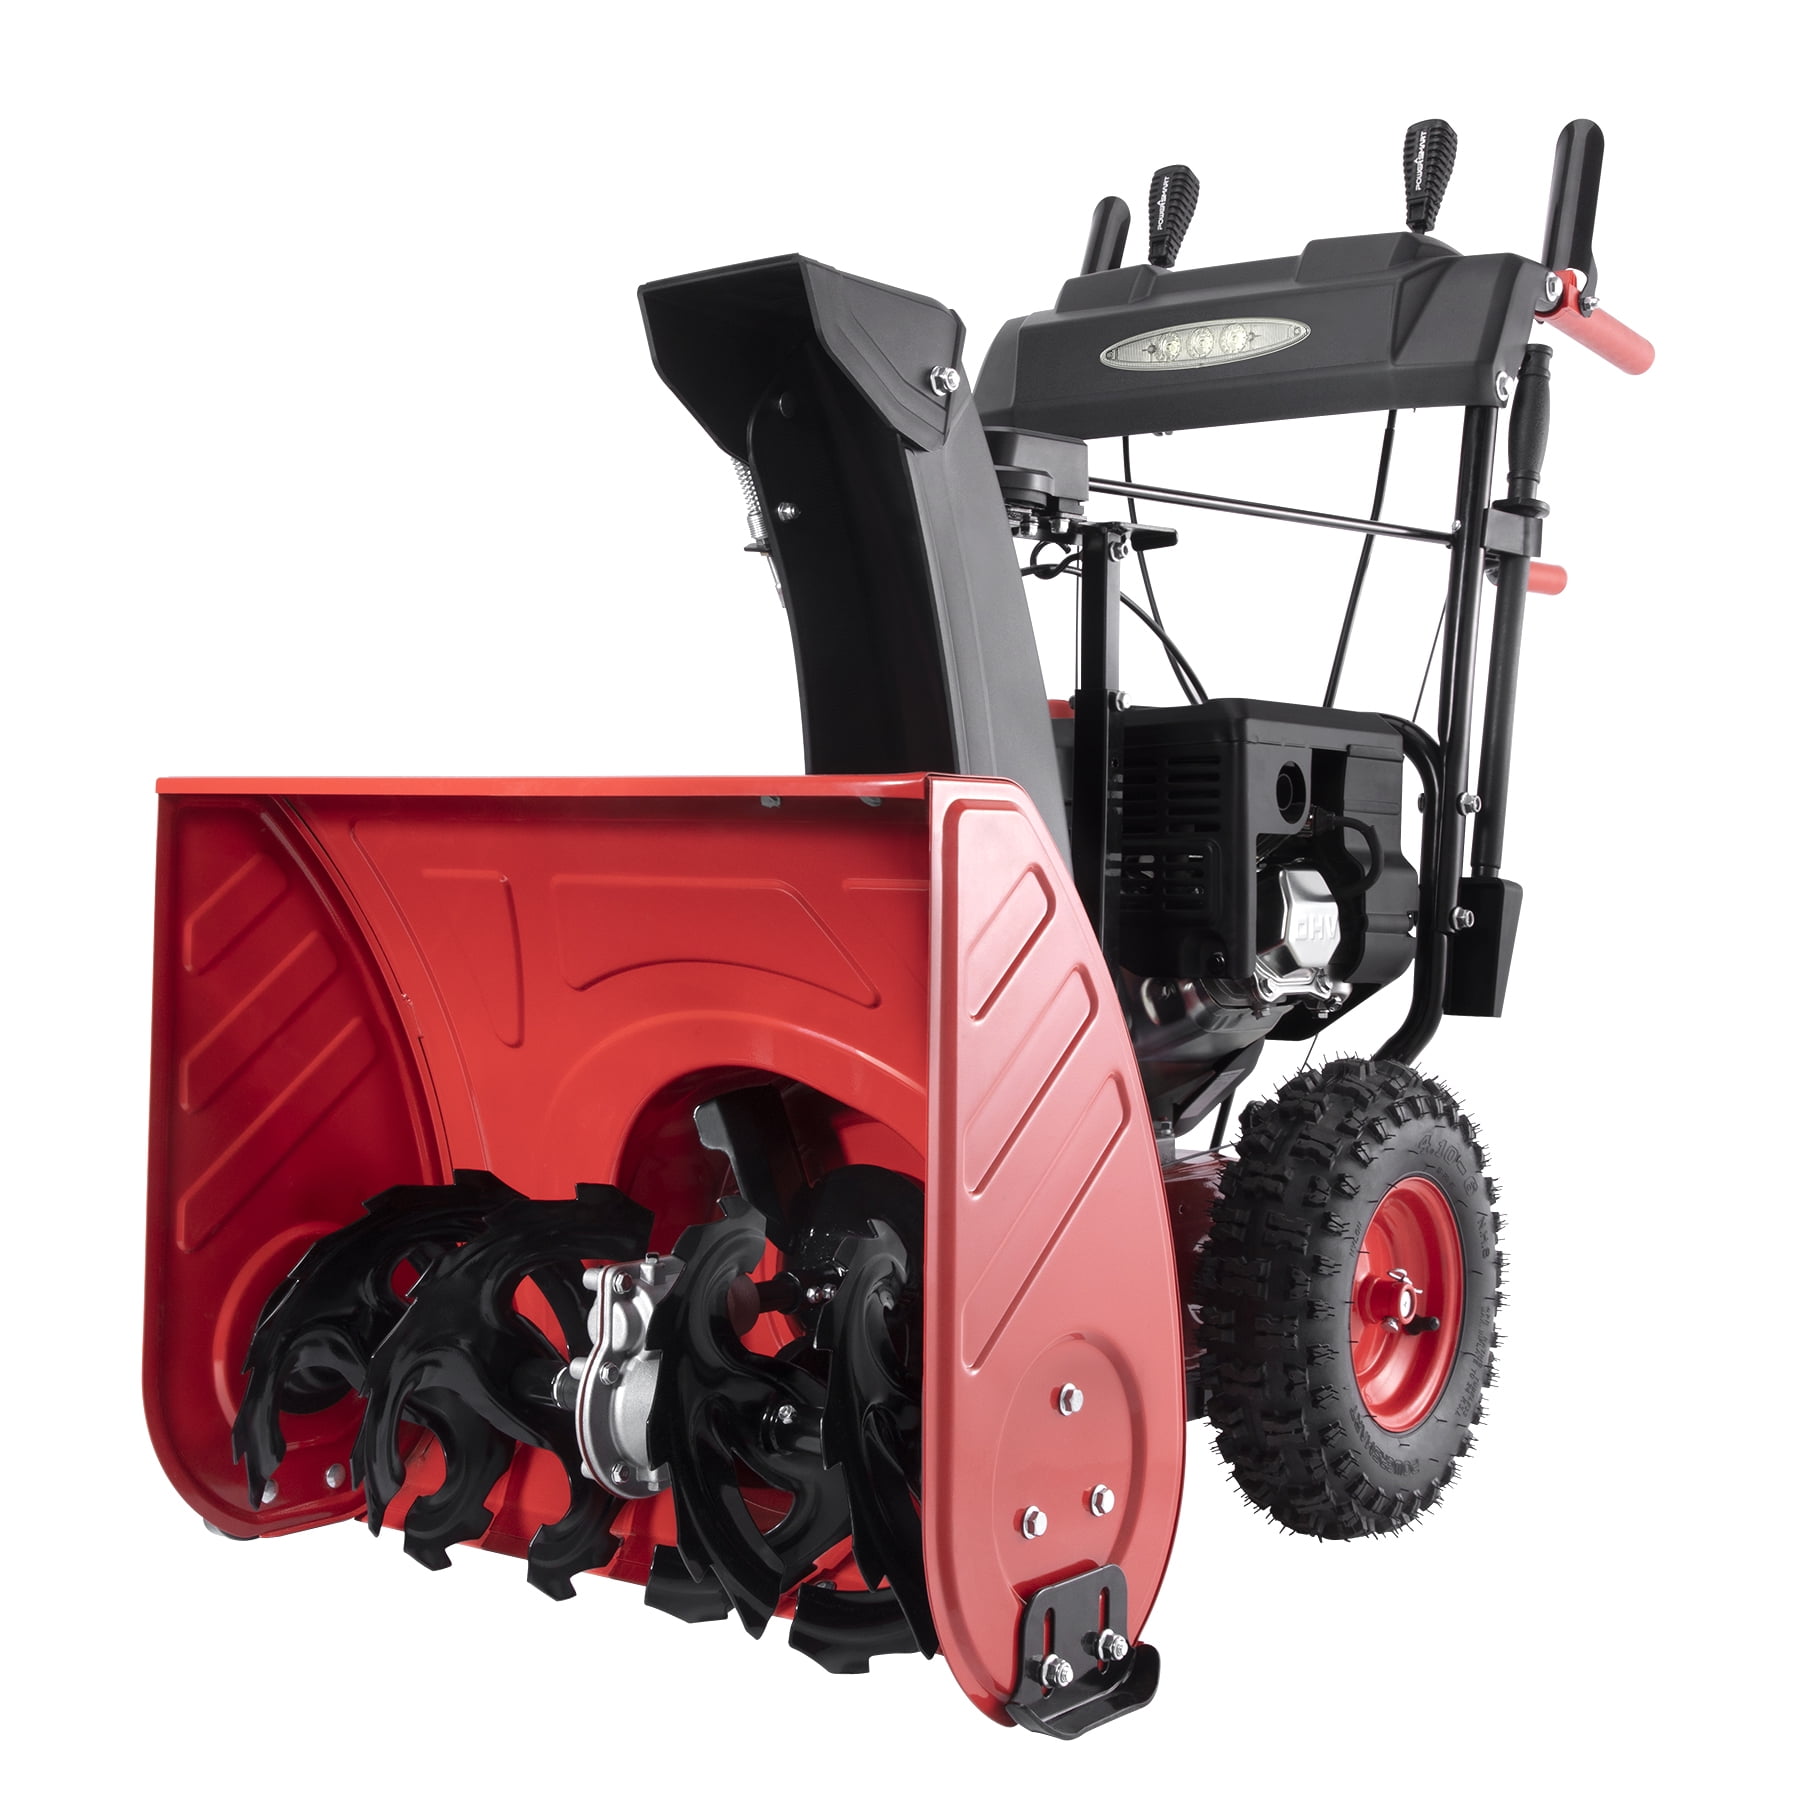 PowerSmart DB7109A 24″ 6 Speed Gas Snow Blower with Two-Stage, Electric Start, LED Headlight